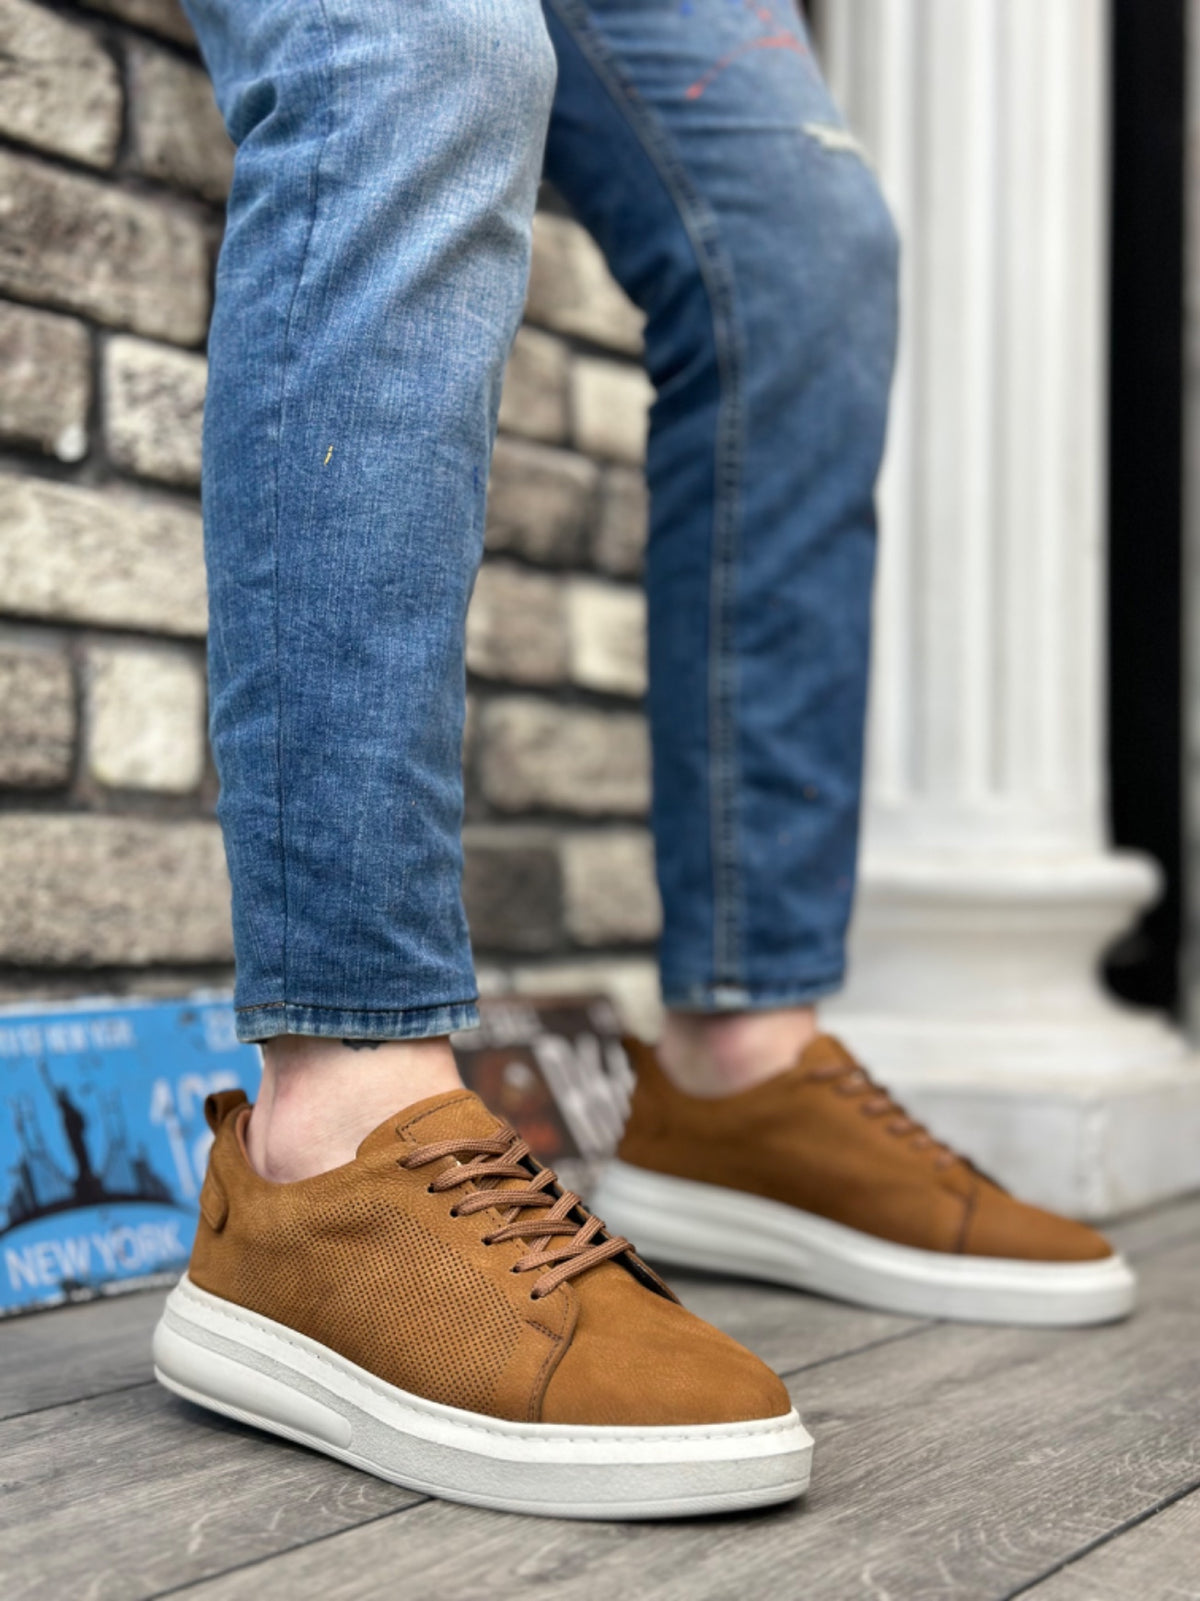 BA0336 Inside and Outside Genuine Nubuck Leather Tan Lace-Up Casual Men's Shoes - STREETMODE™